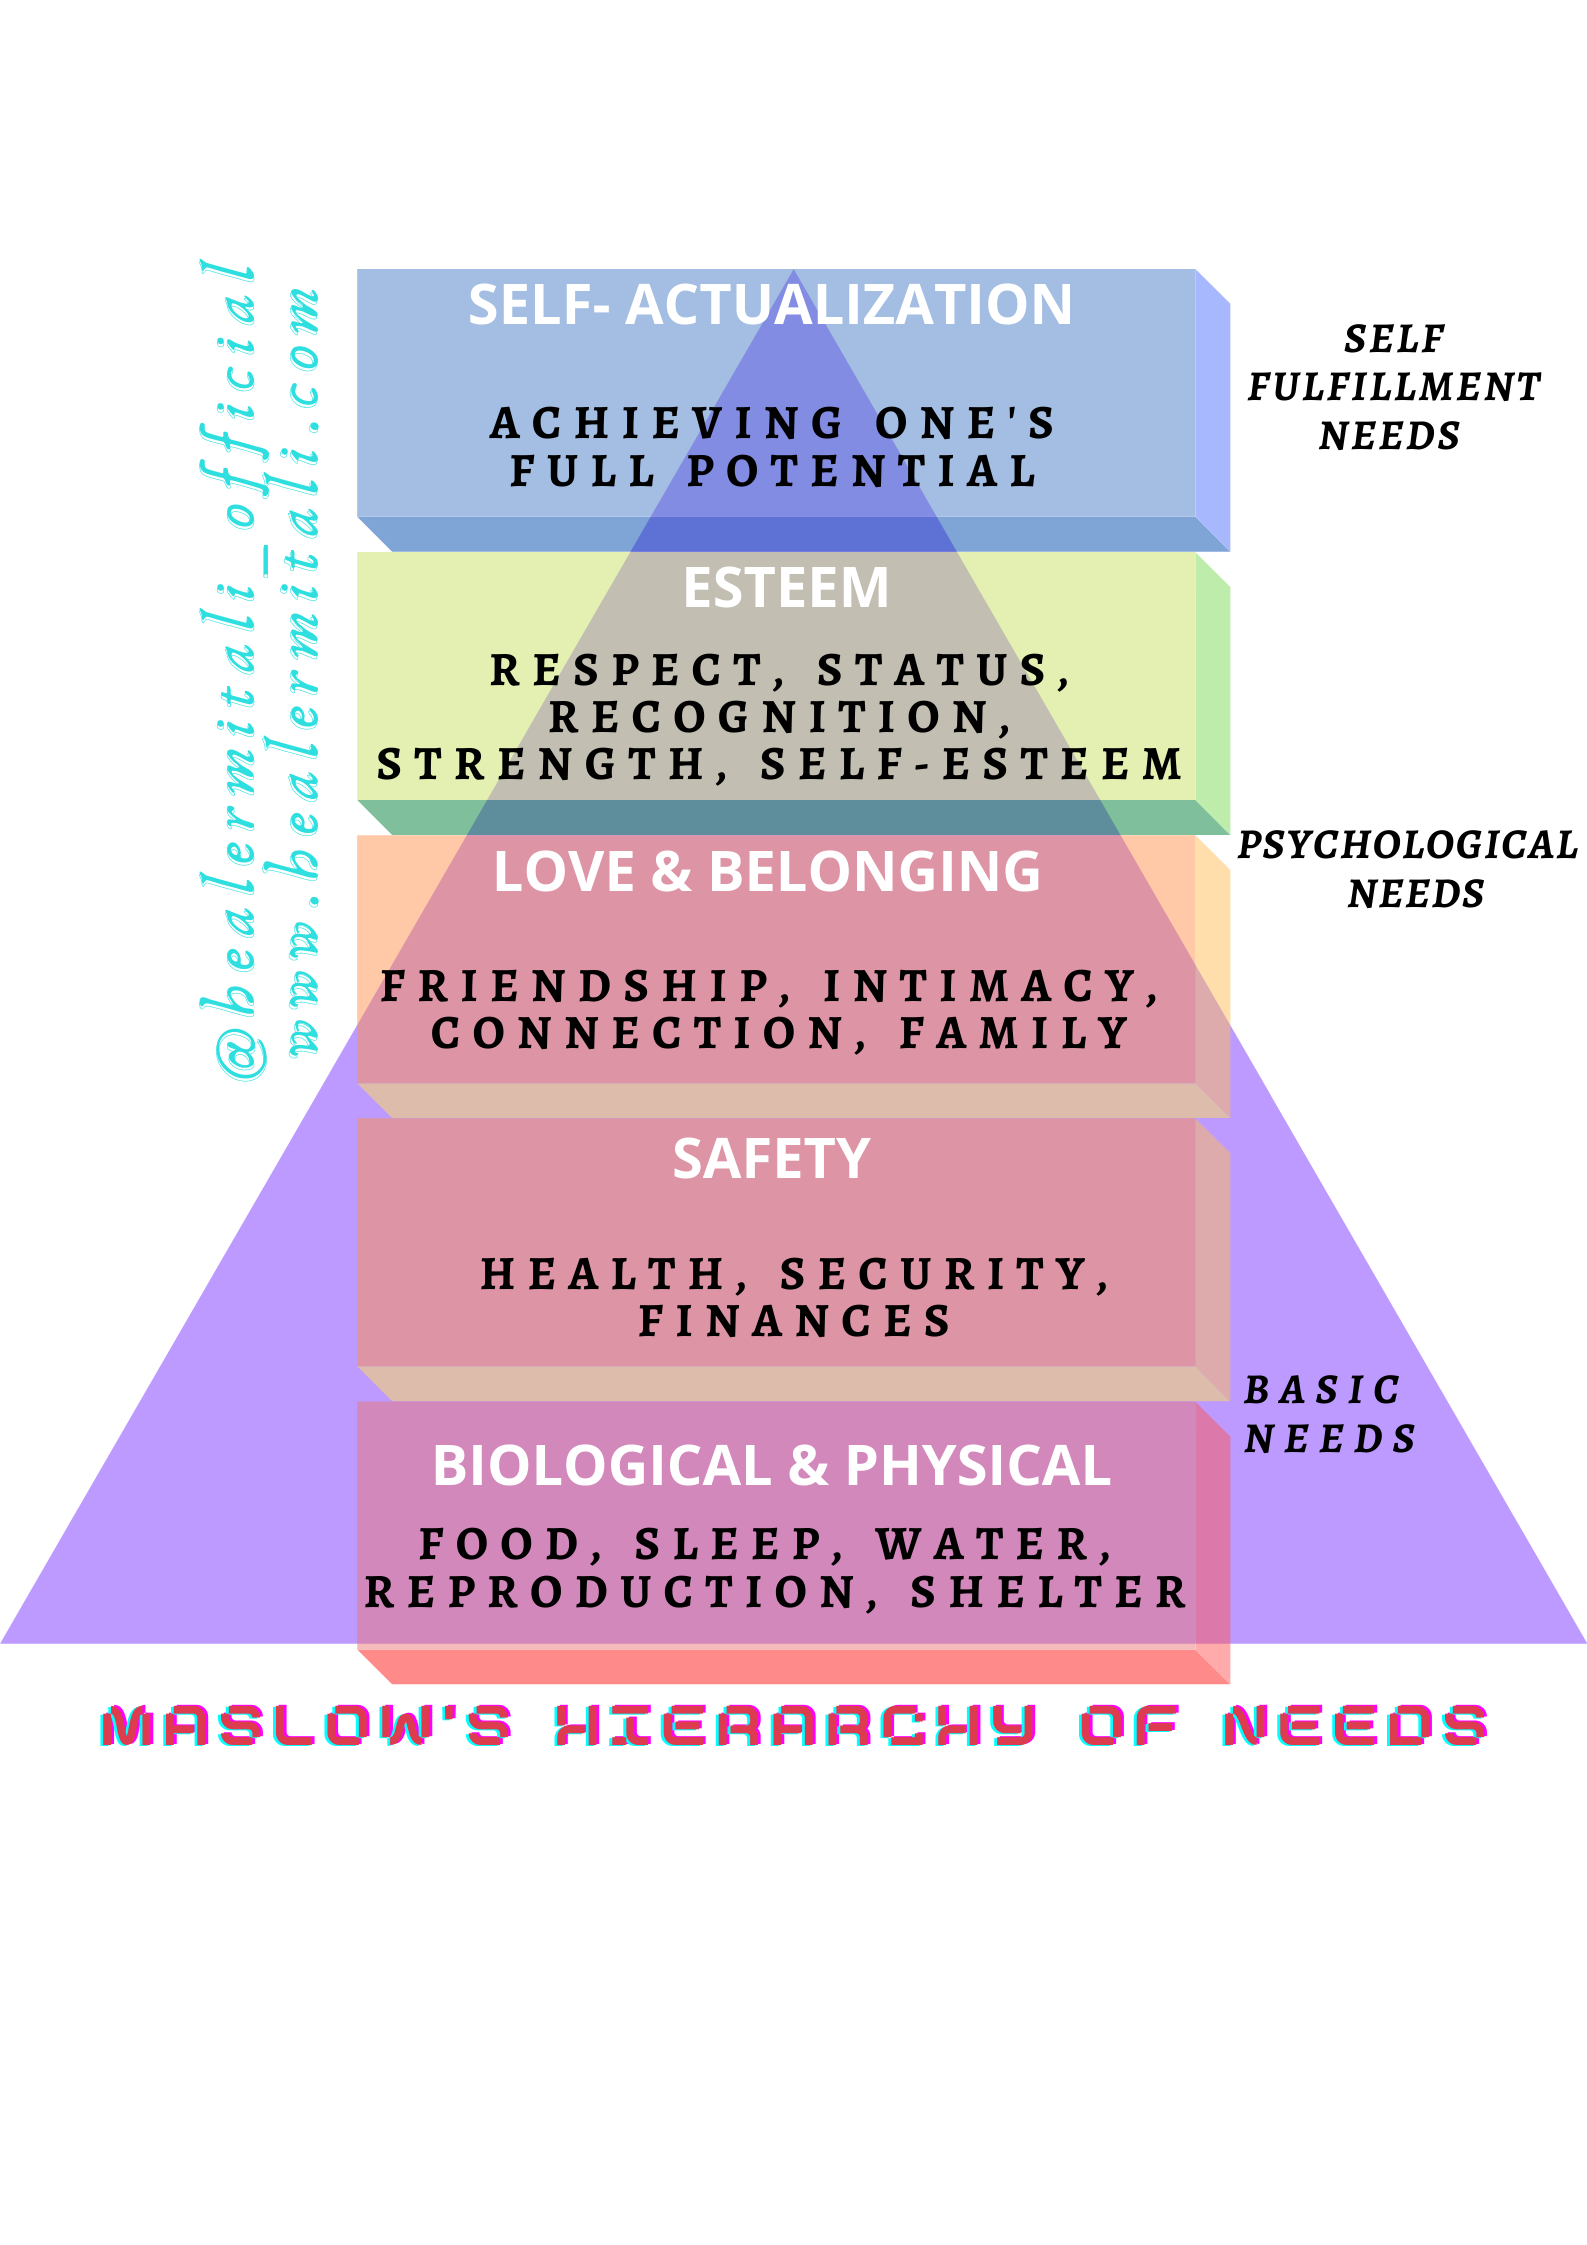 Hierarchy of needs and chakras